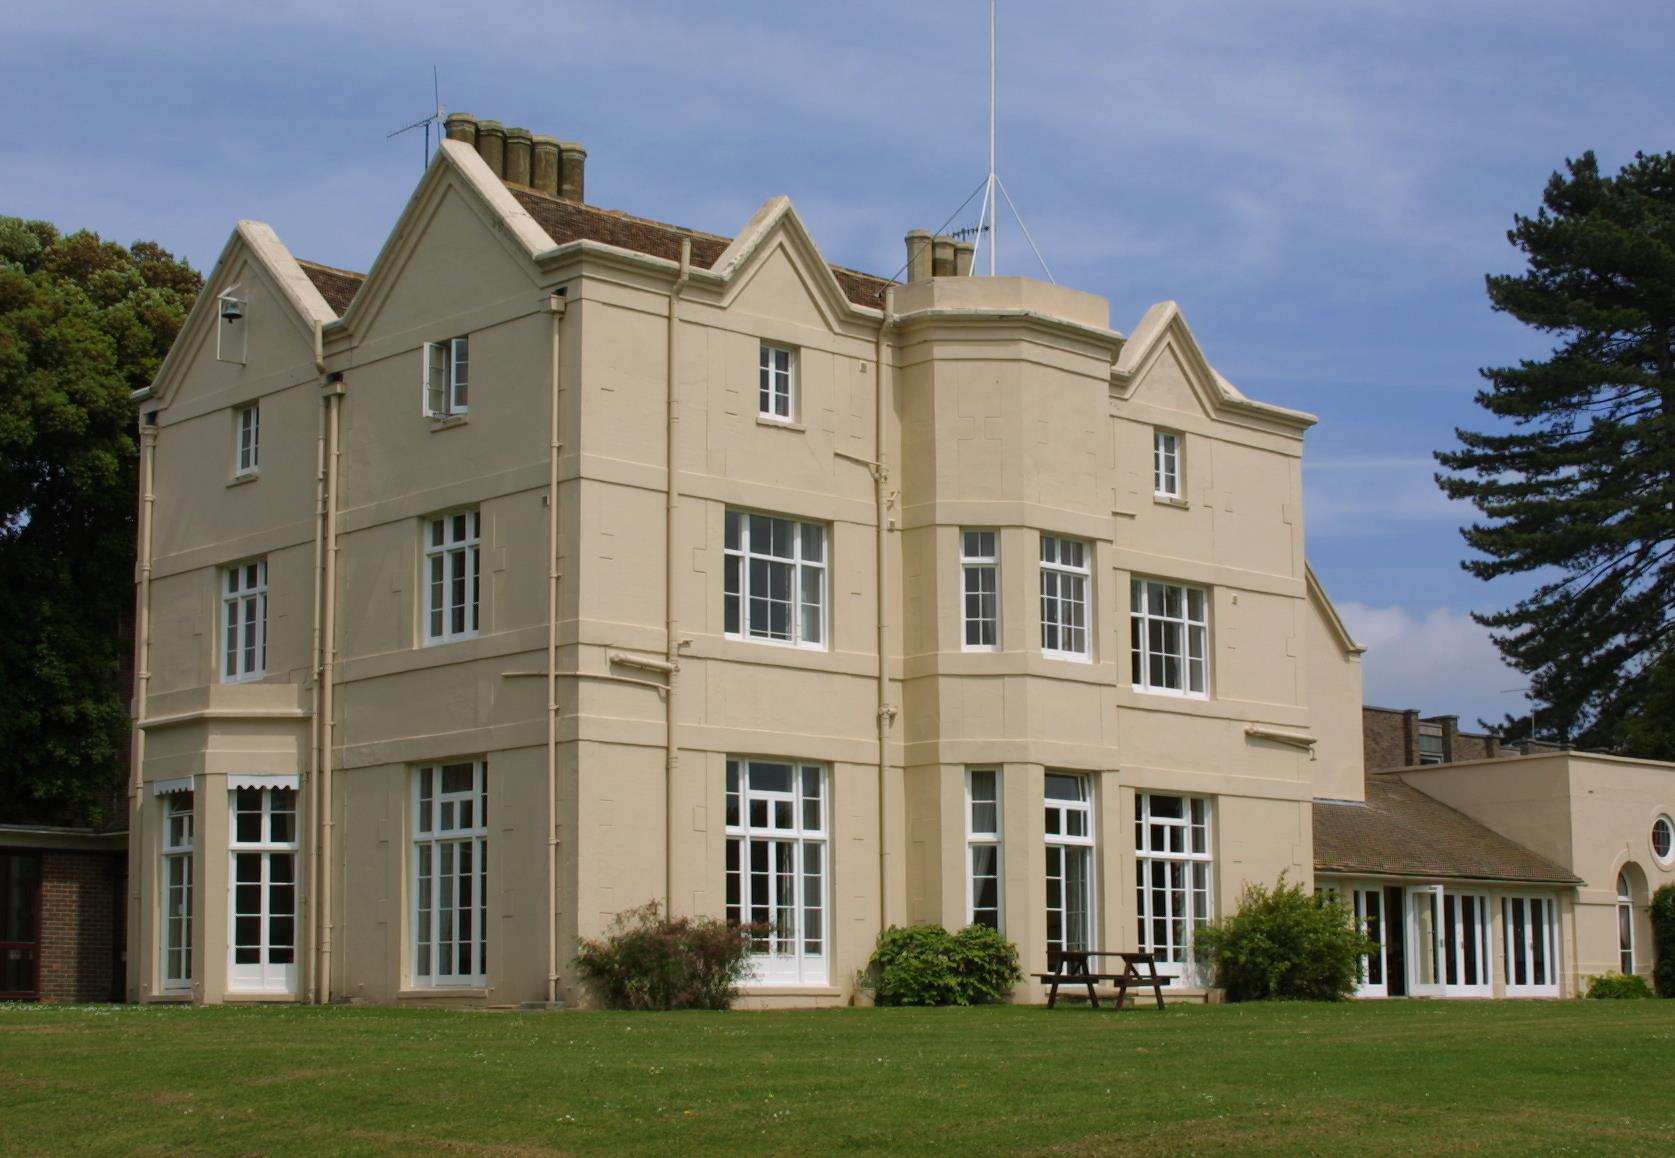 The site’s main building - the Grade I-listed Withersdane Hall